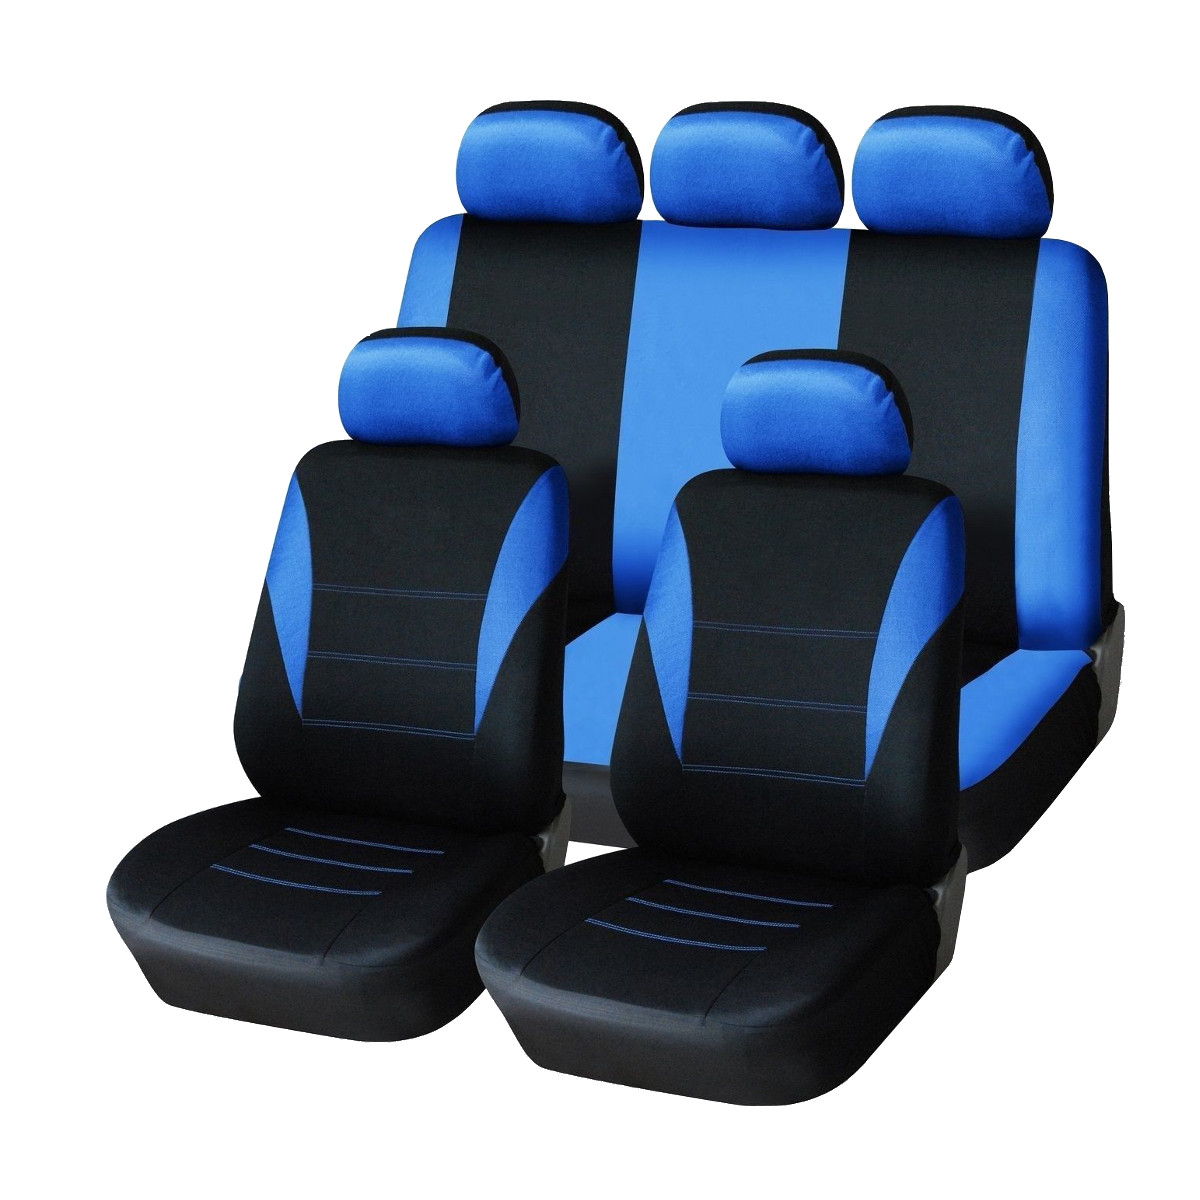 

Universal Four Seasons Blue Black Fabric Car Seat Cover Protectors 9pc Full Set Airbag Compatible